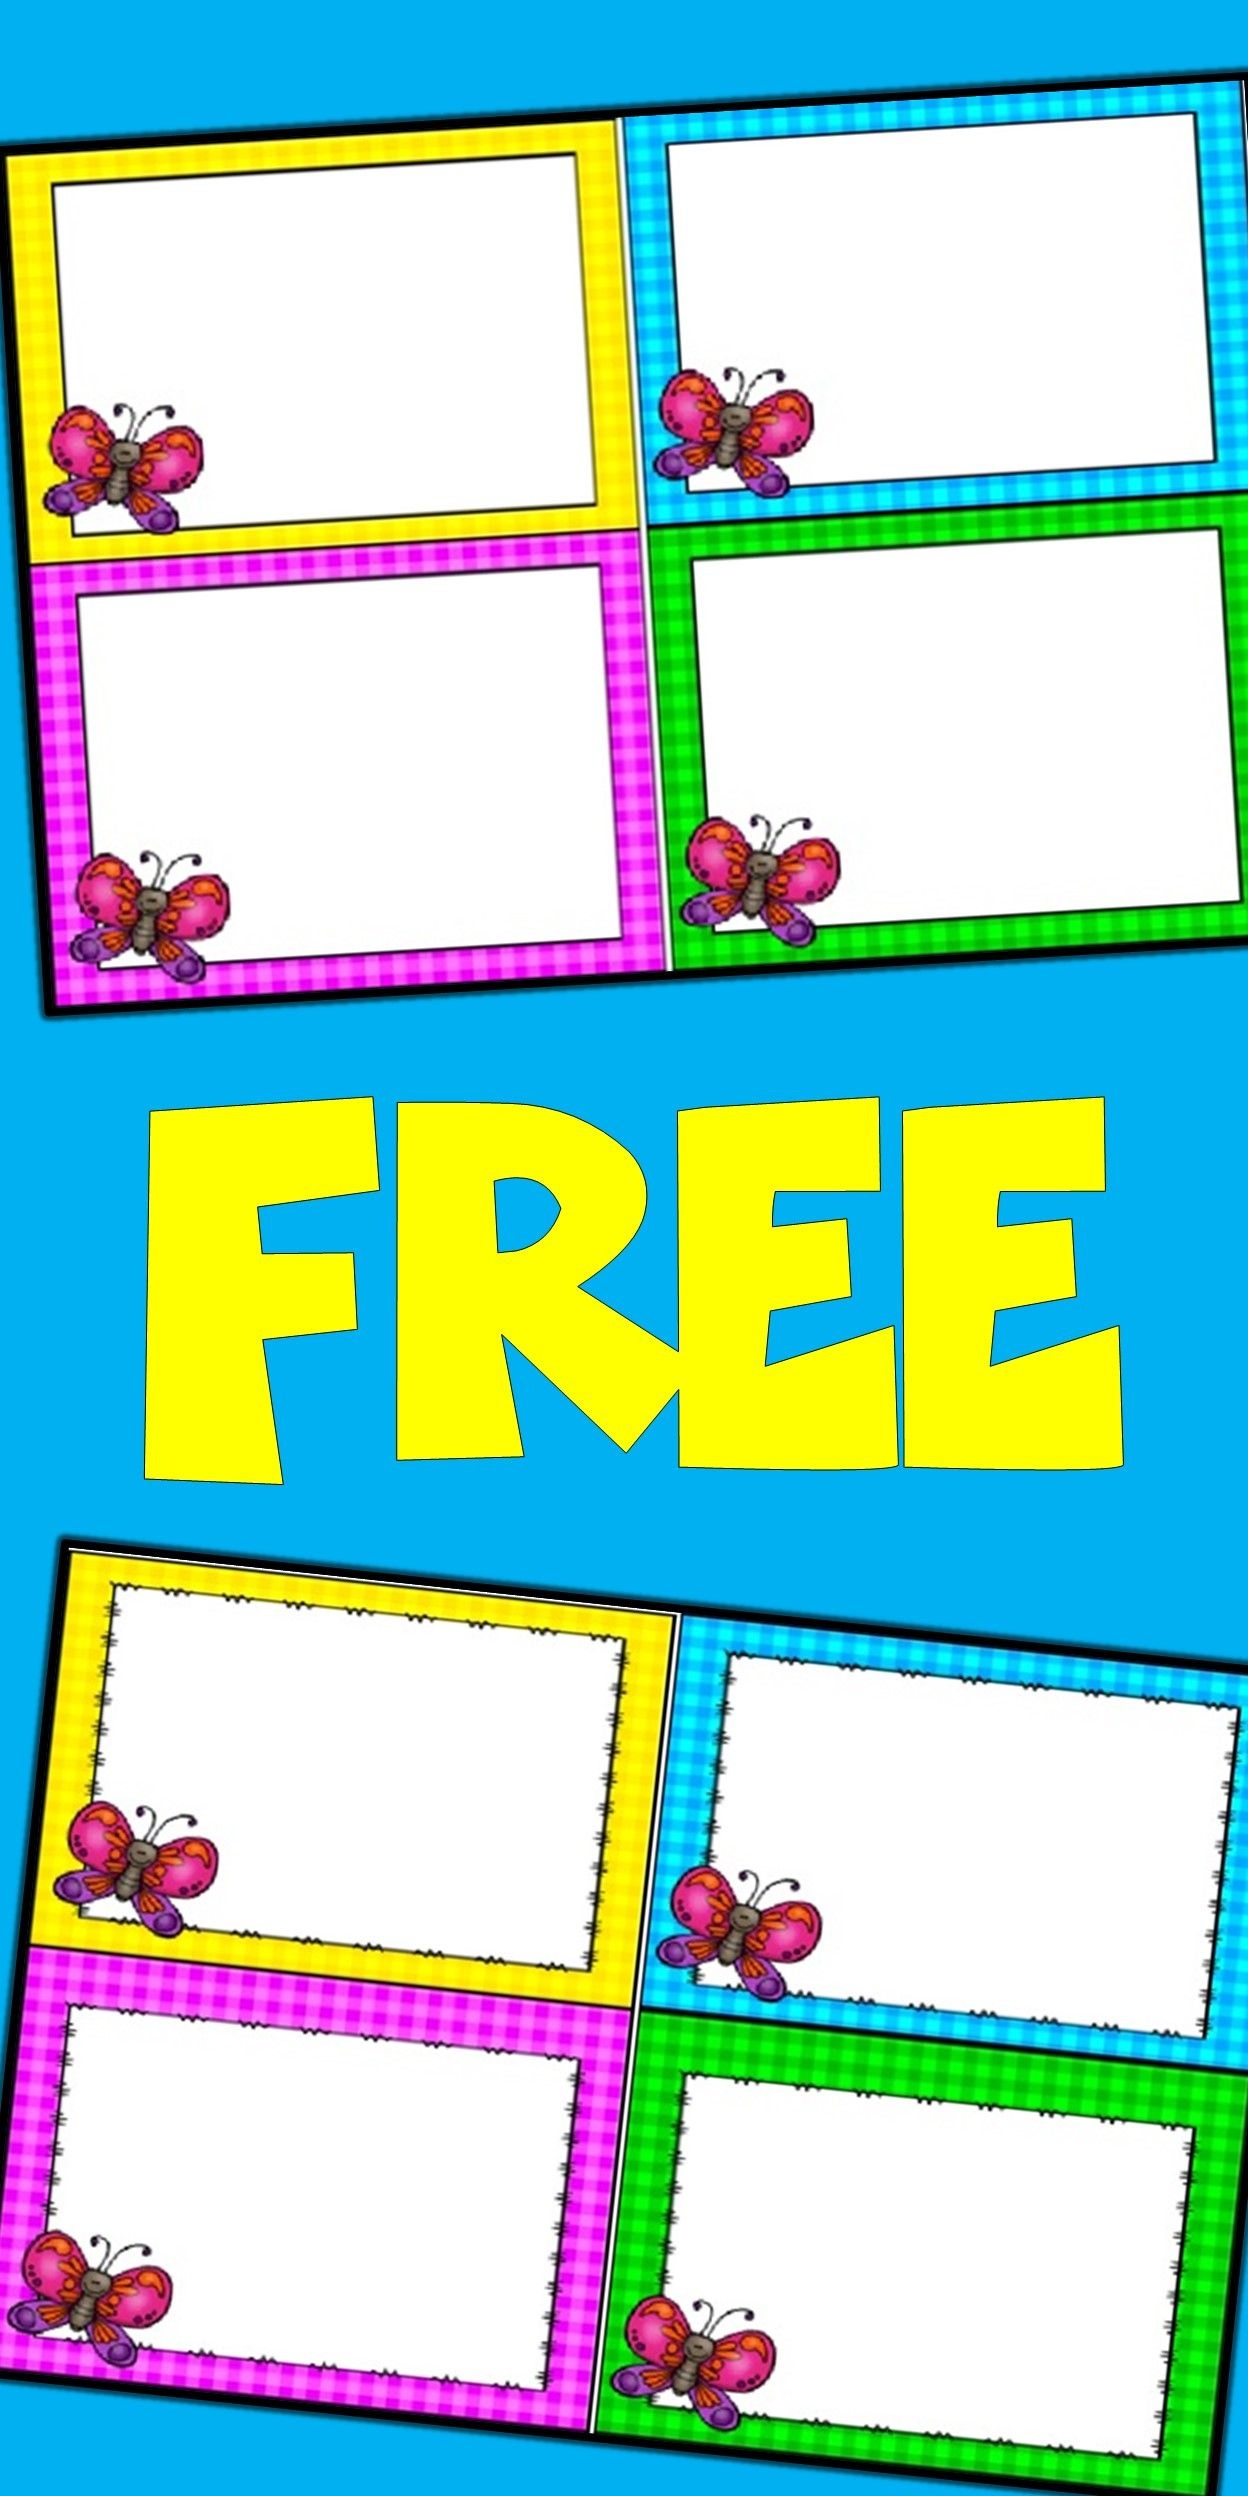 Free Editable Spring Card Templates | Butterflies | Butterfly - Free Printable Blank Task Cards